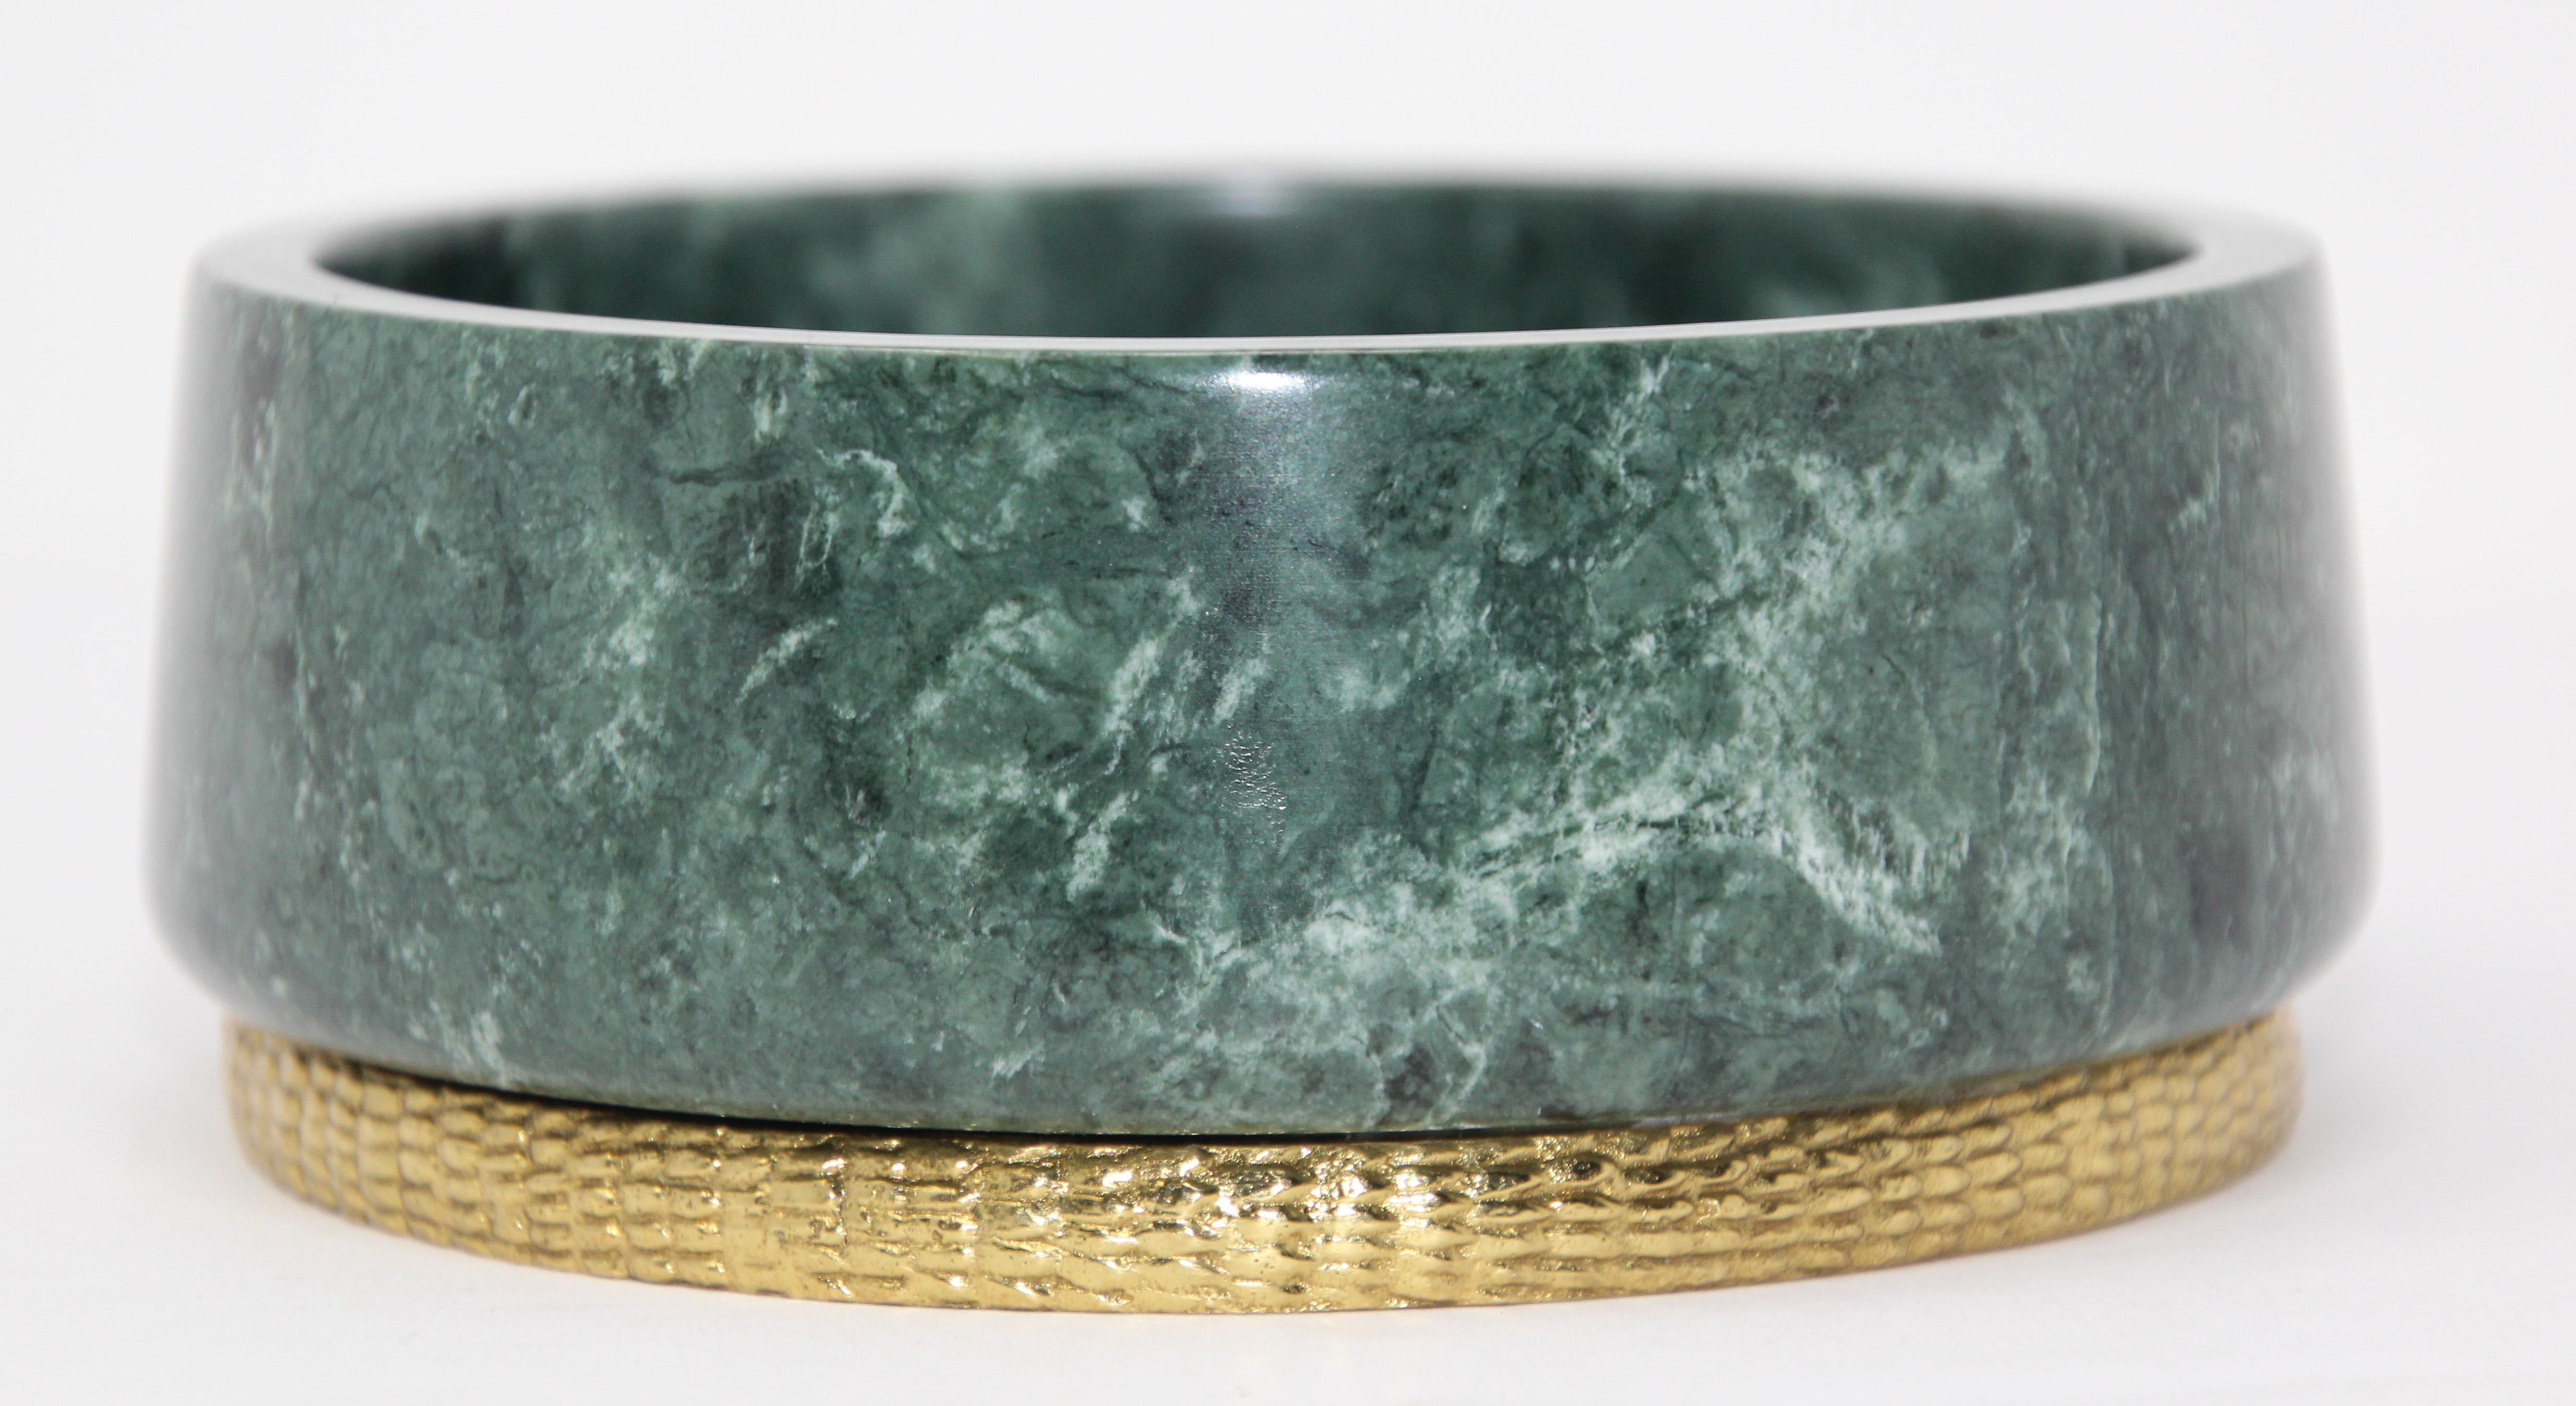 Michael Aram modern green marble footed bowl catchall with brass.
Green marble Michael Aram Rainforest centerpiece bowl featuring raised gold-tone brass border at base and brand stamp at underside
Use as a catchall or decorative bowl. 
Jade green